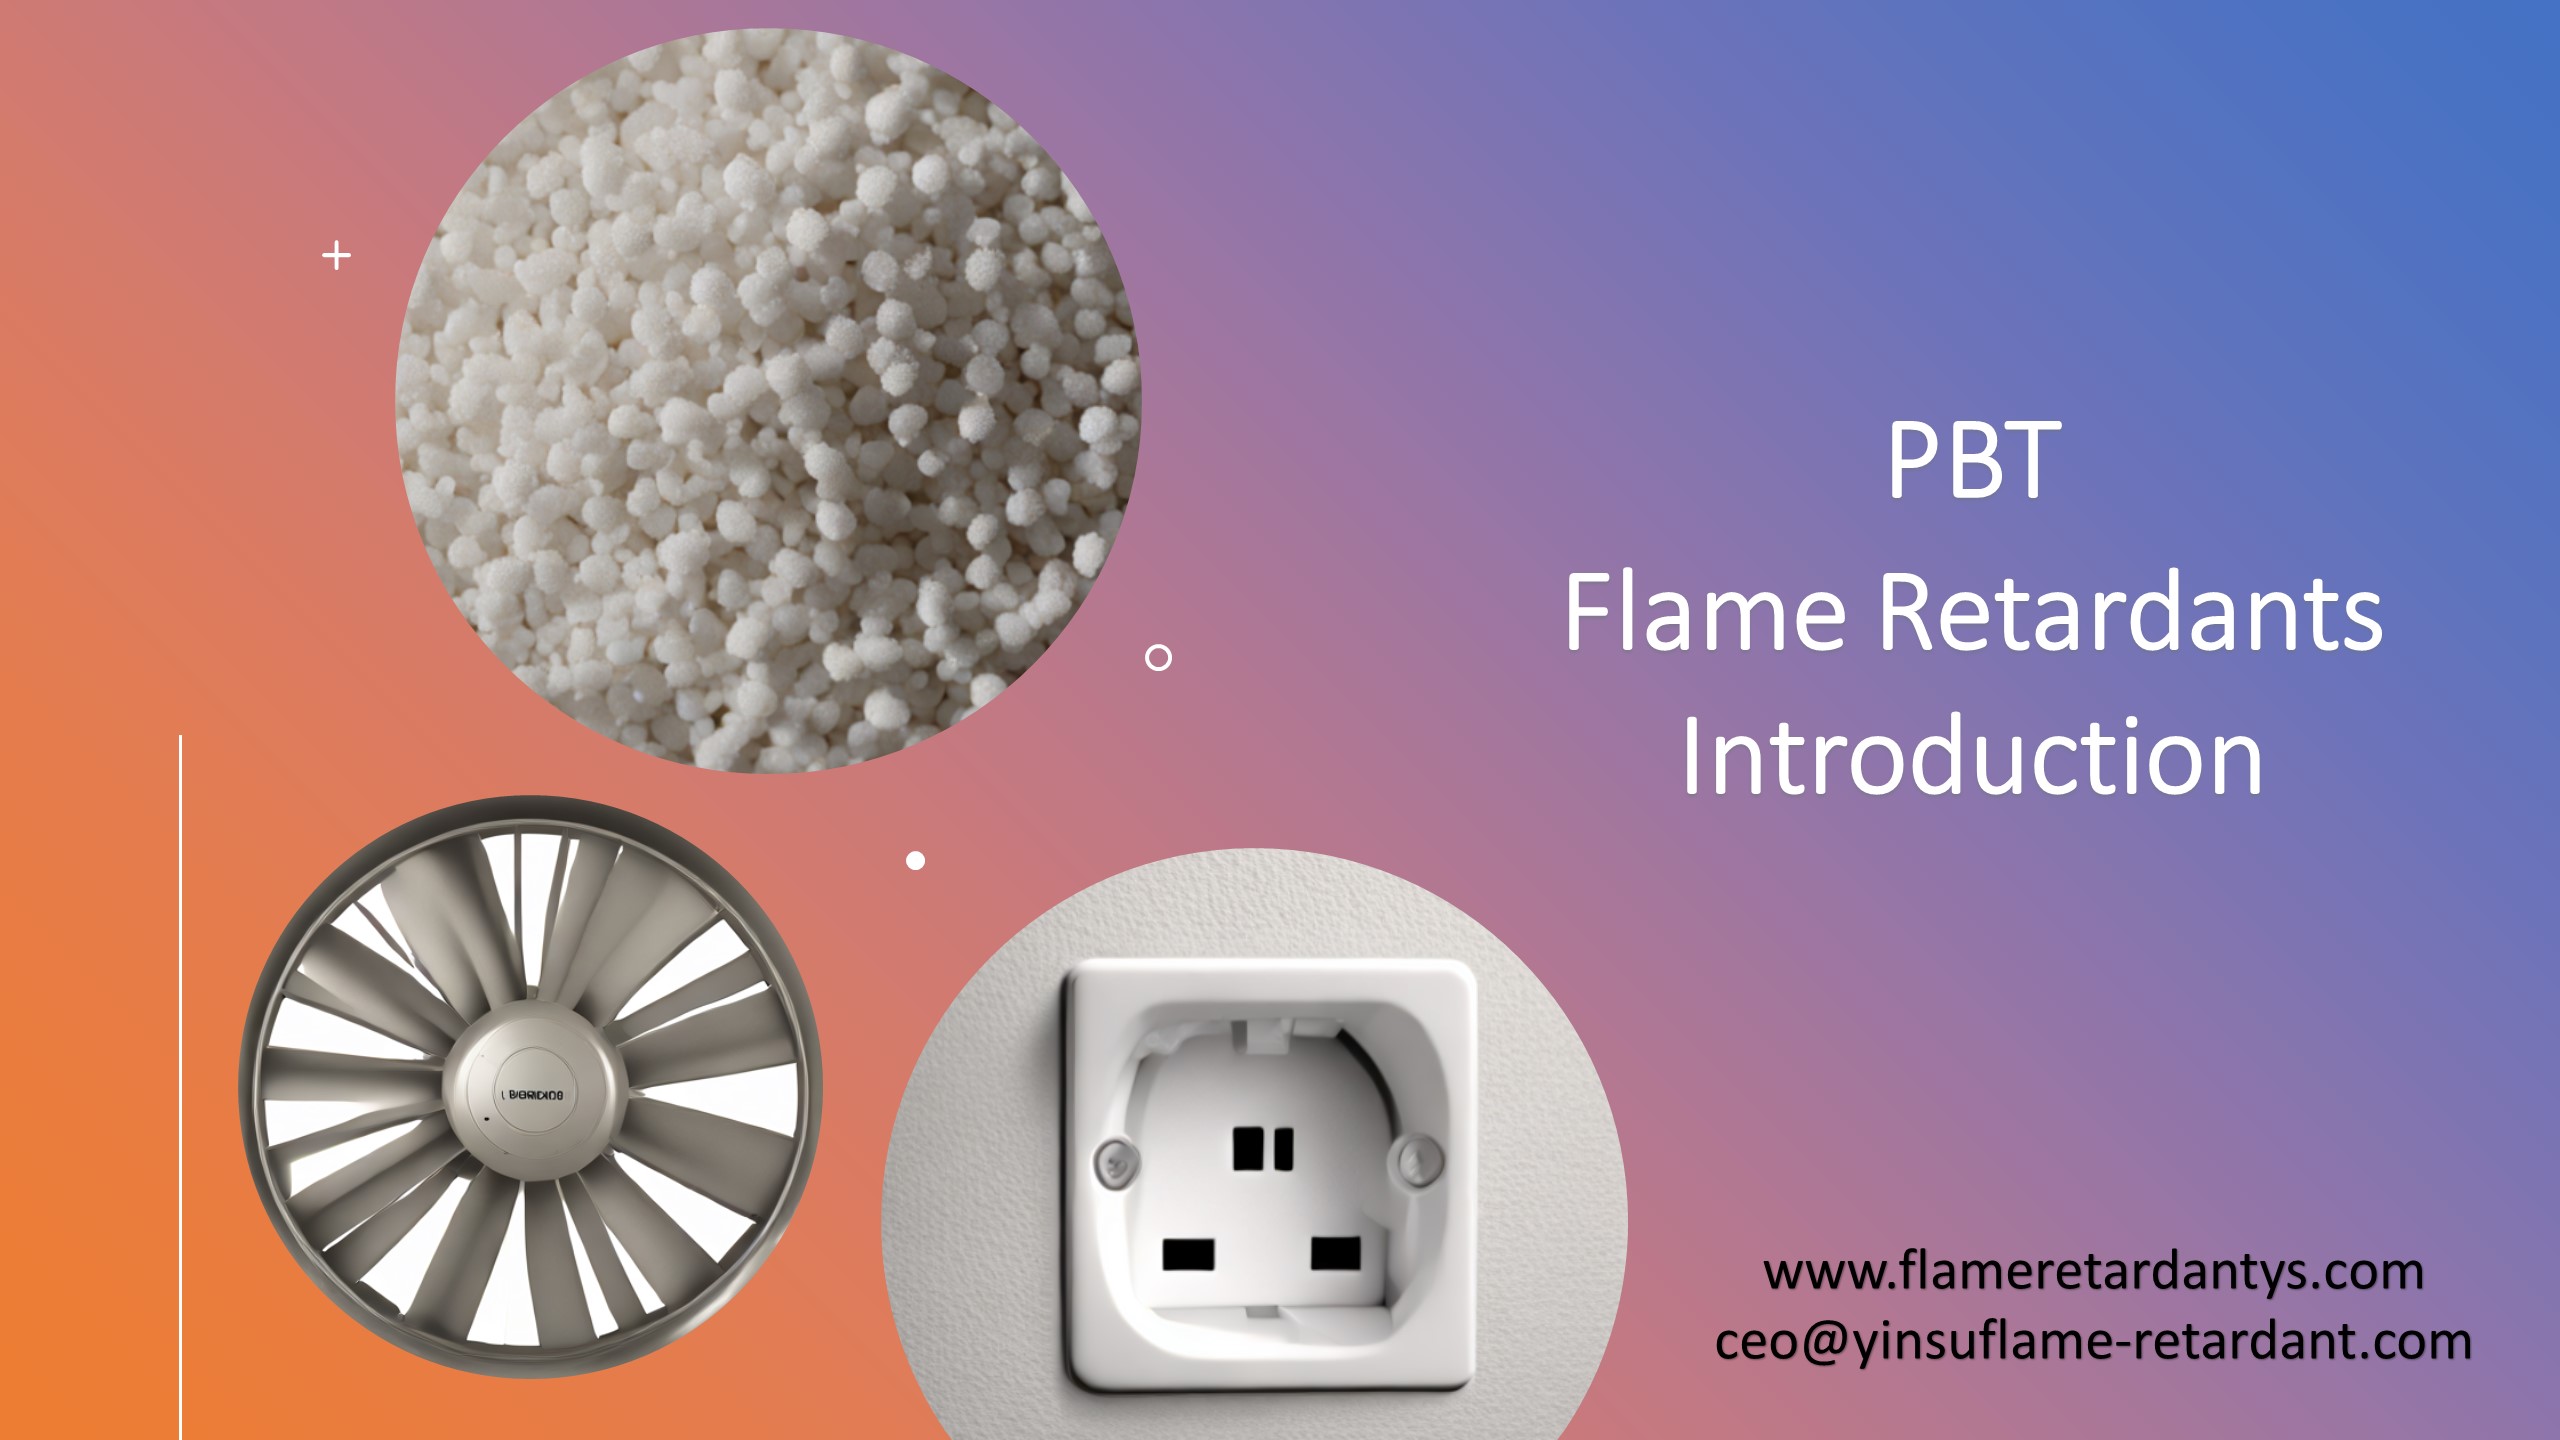 PBT Flame Retardant: Types, Strengths, Weaknesses, And Development